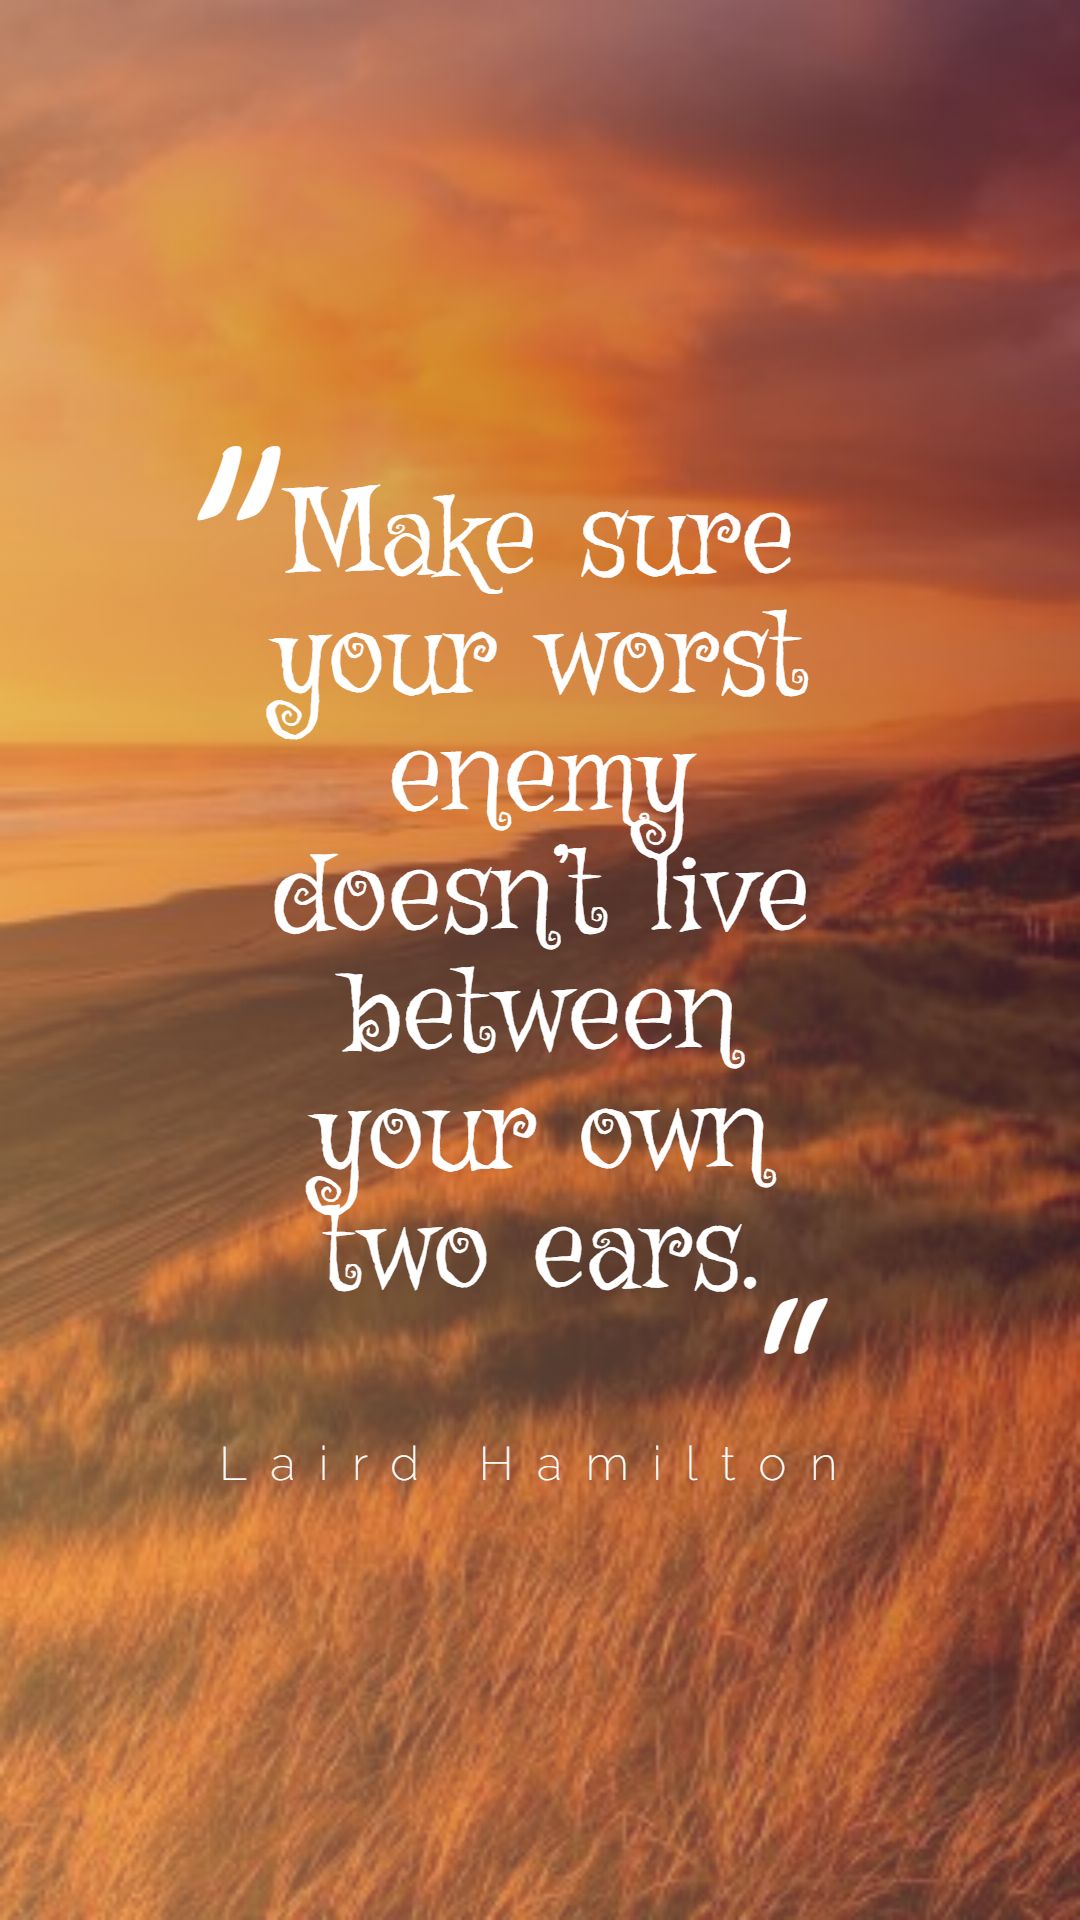 Make sure your worst enemy doesn’t live between your own two ears.